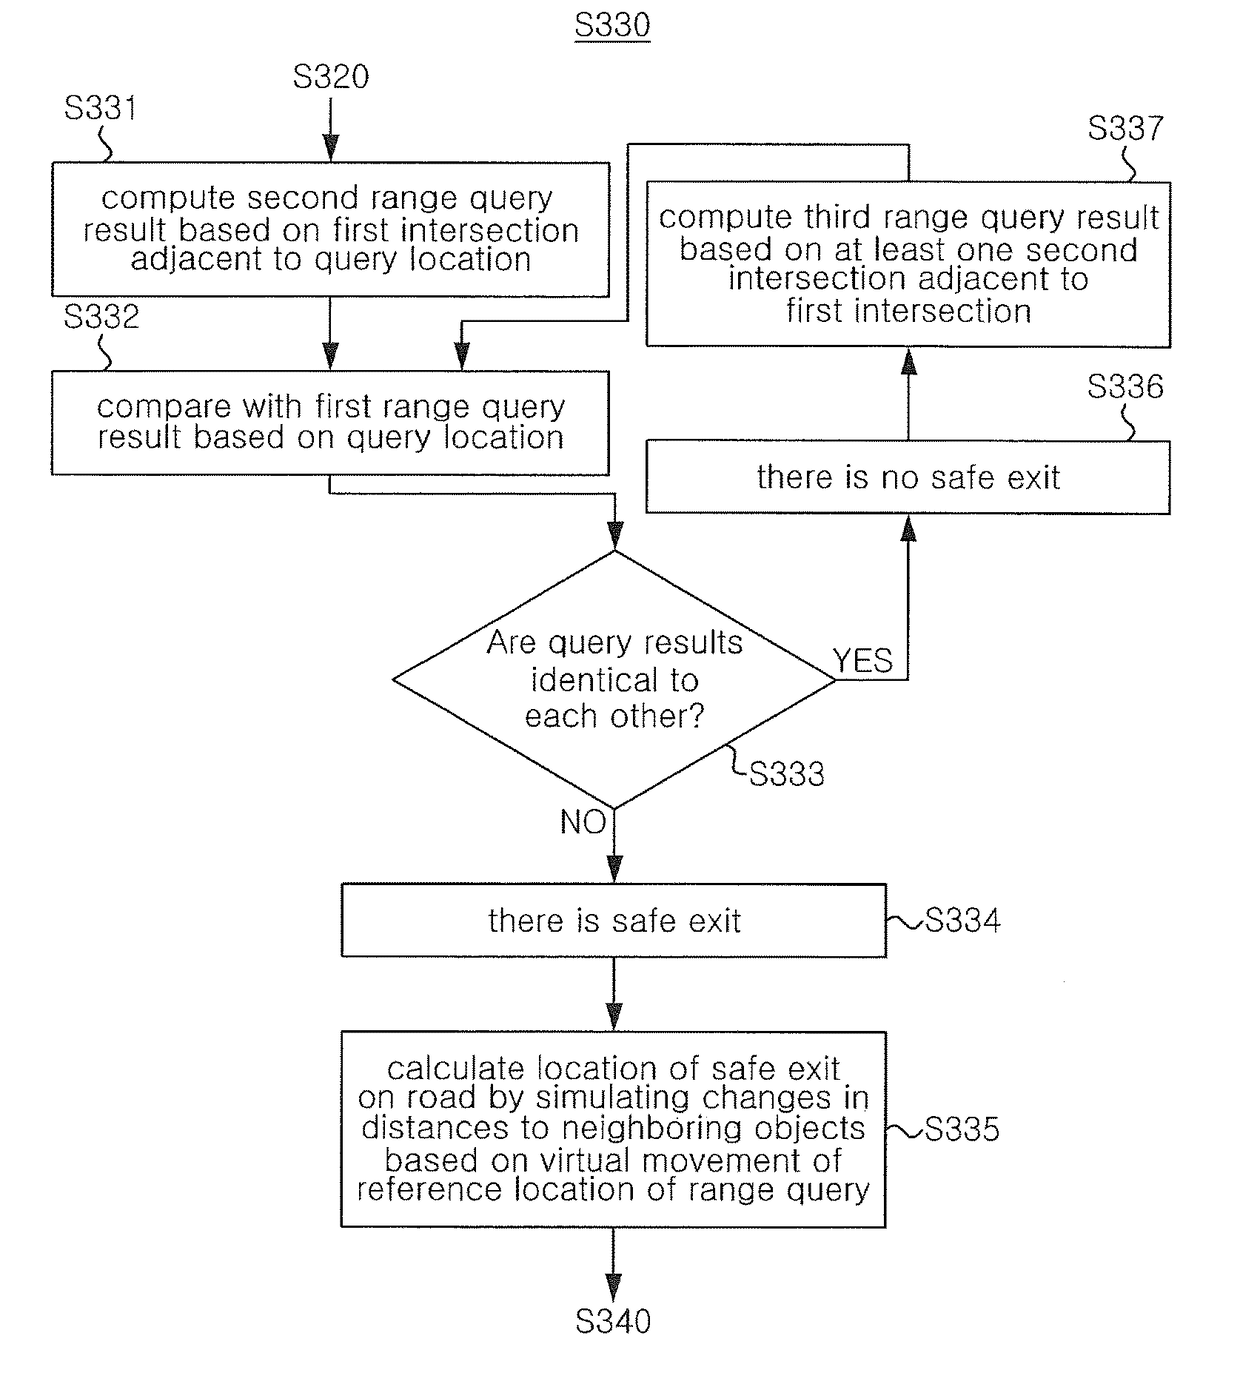 Method and apparatus of computing location of safe exit for moving range query in road network